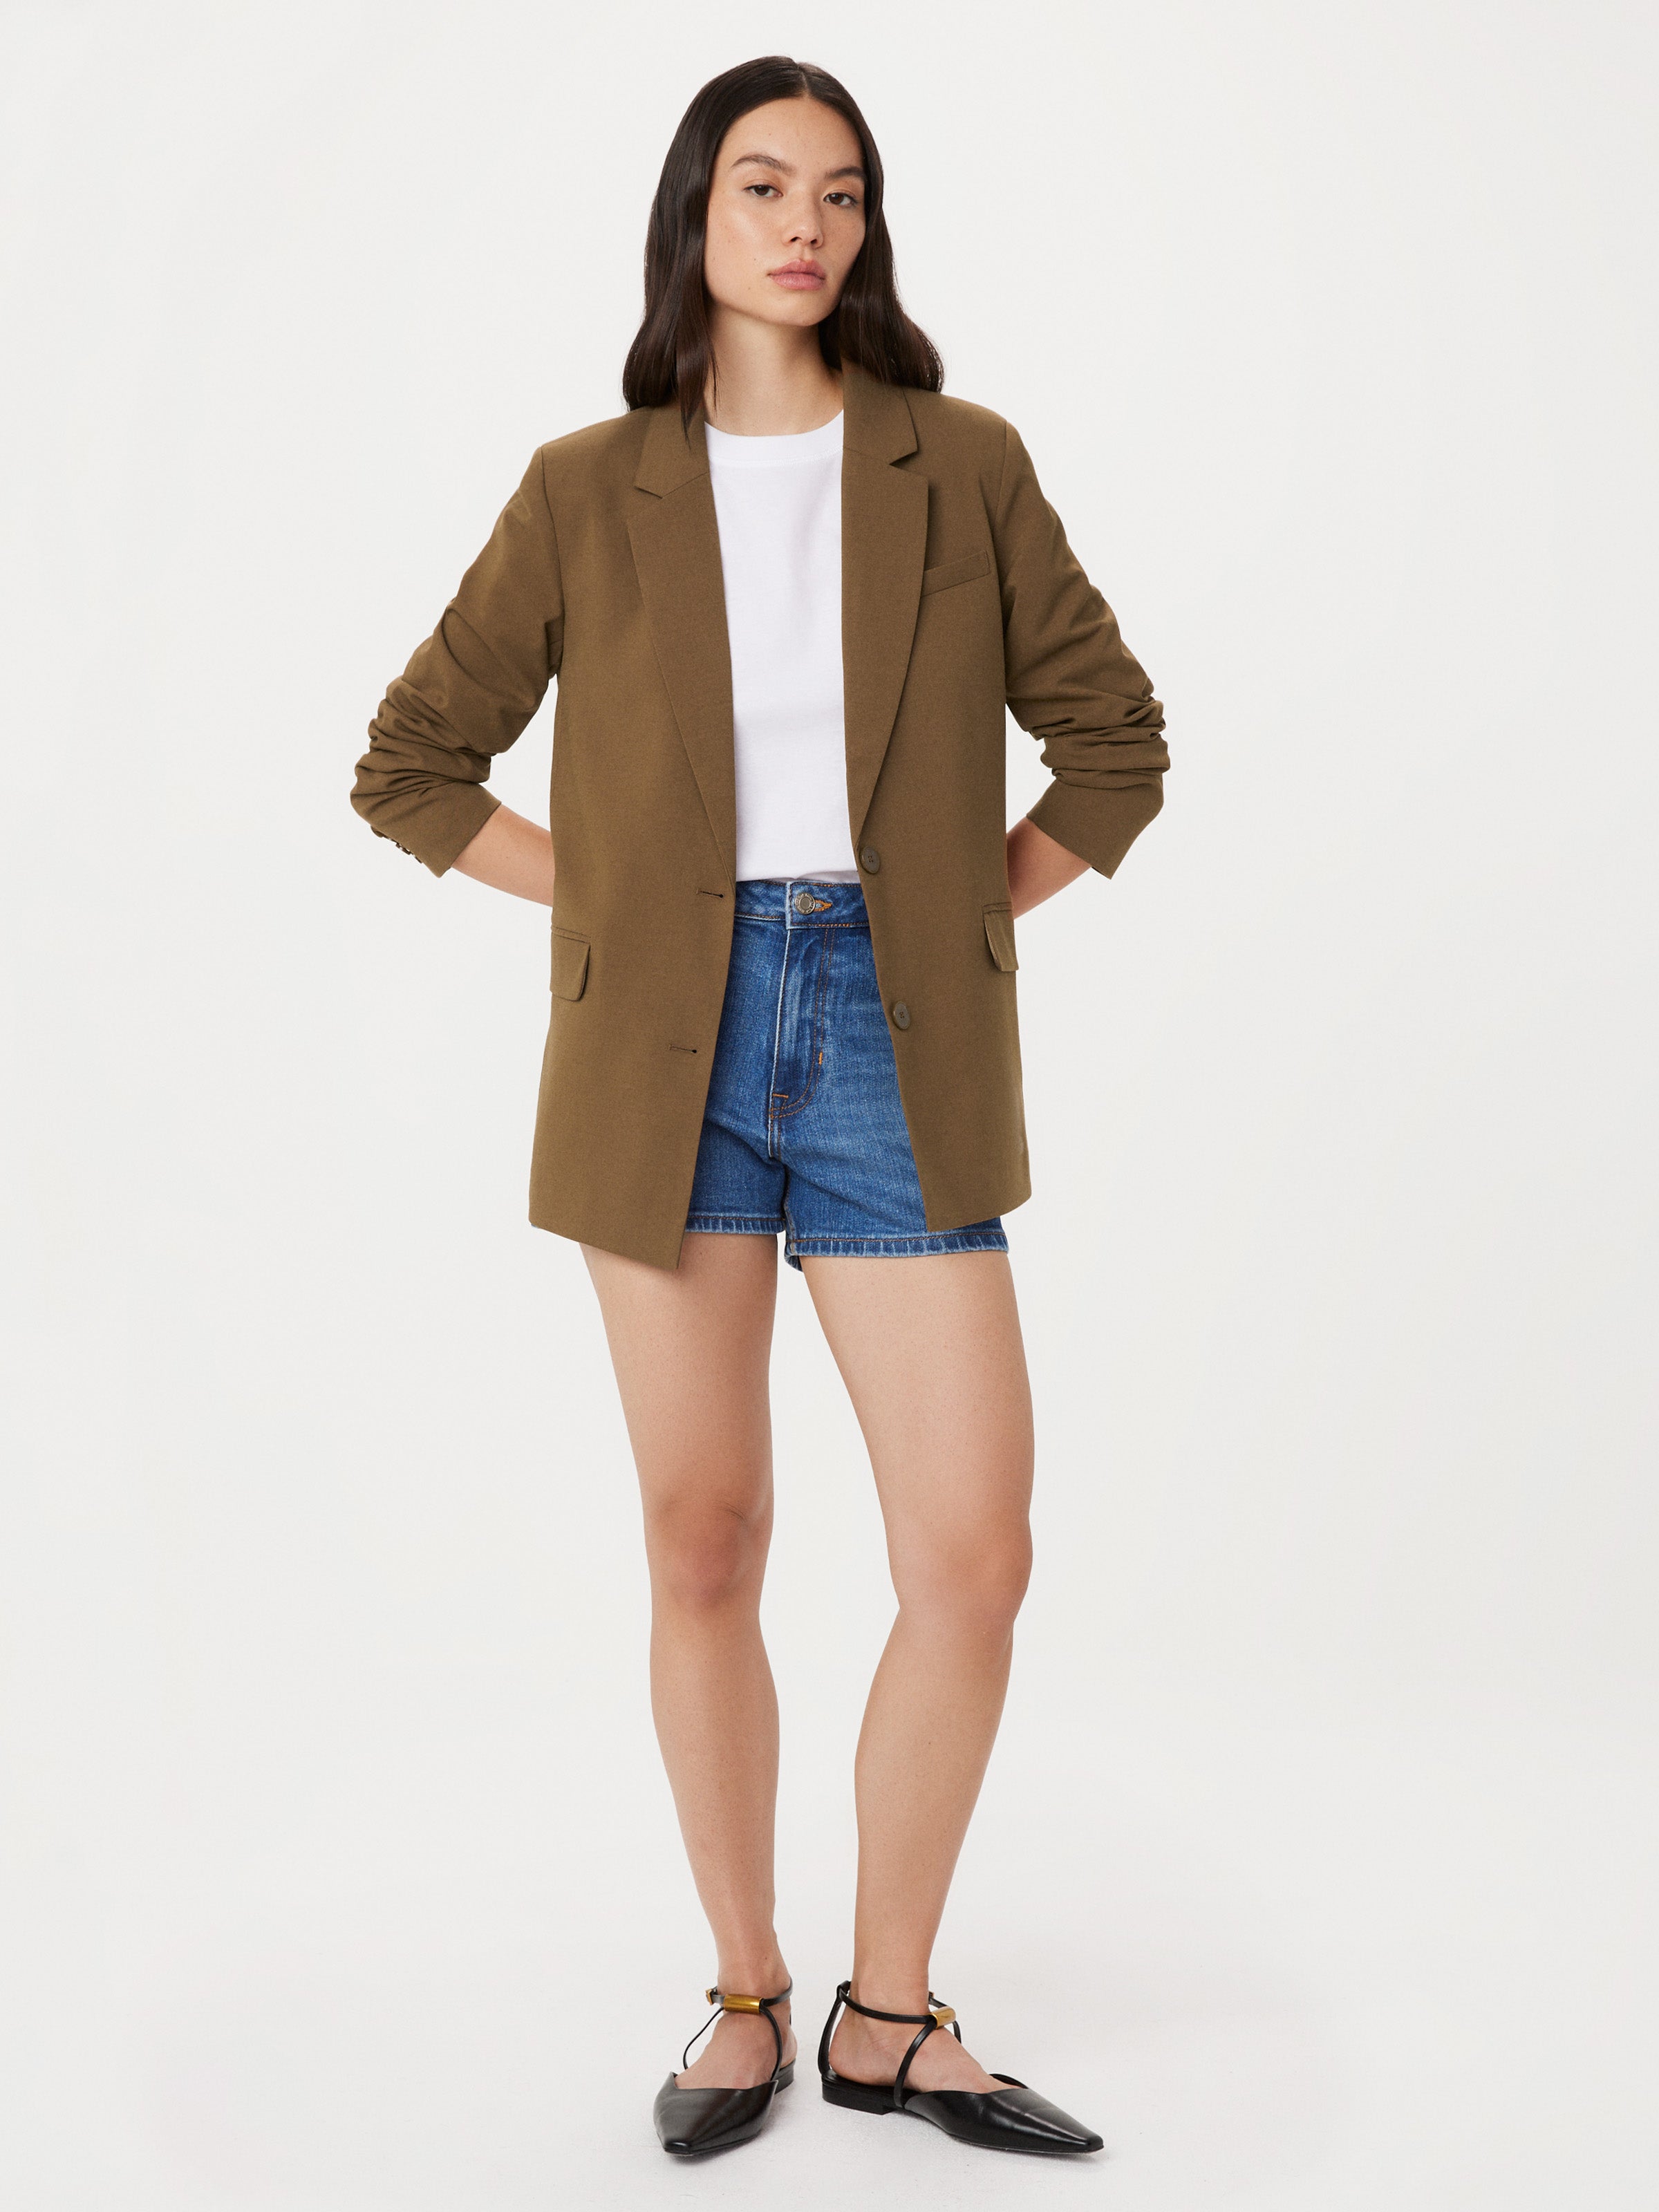 The Relaxed Single Breasted Blazer in Sepia